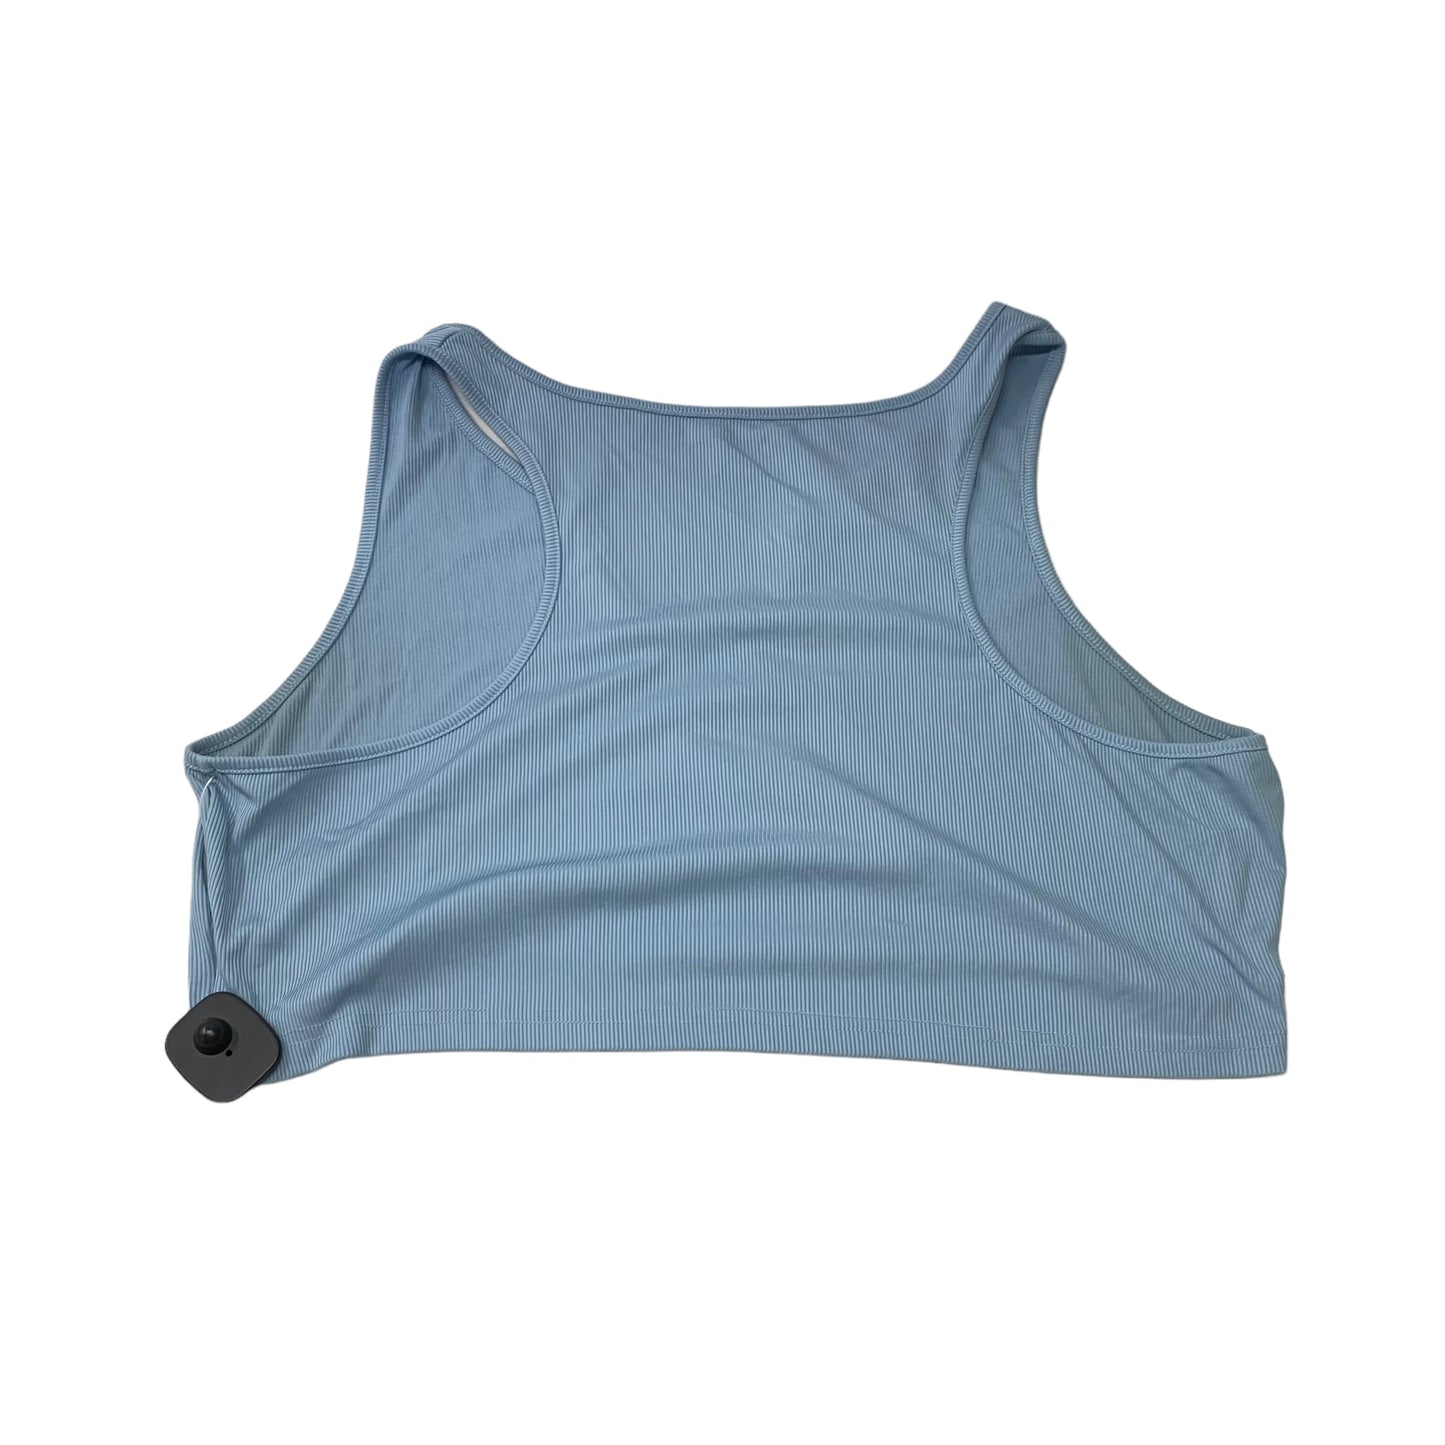 Top Sleeveless By Clothes Mentor  Size: 4x